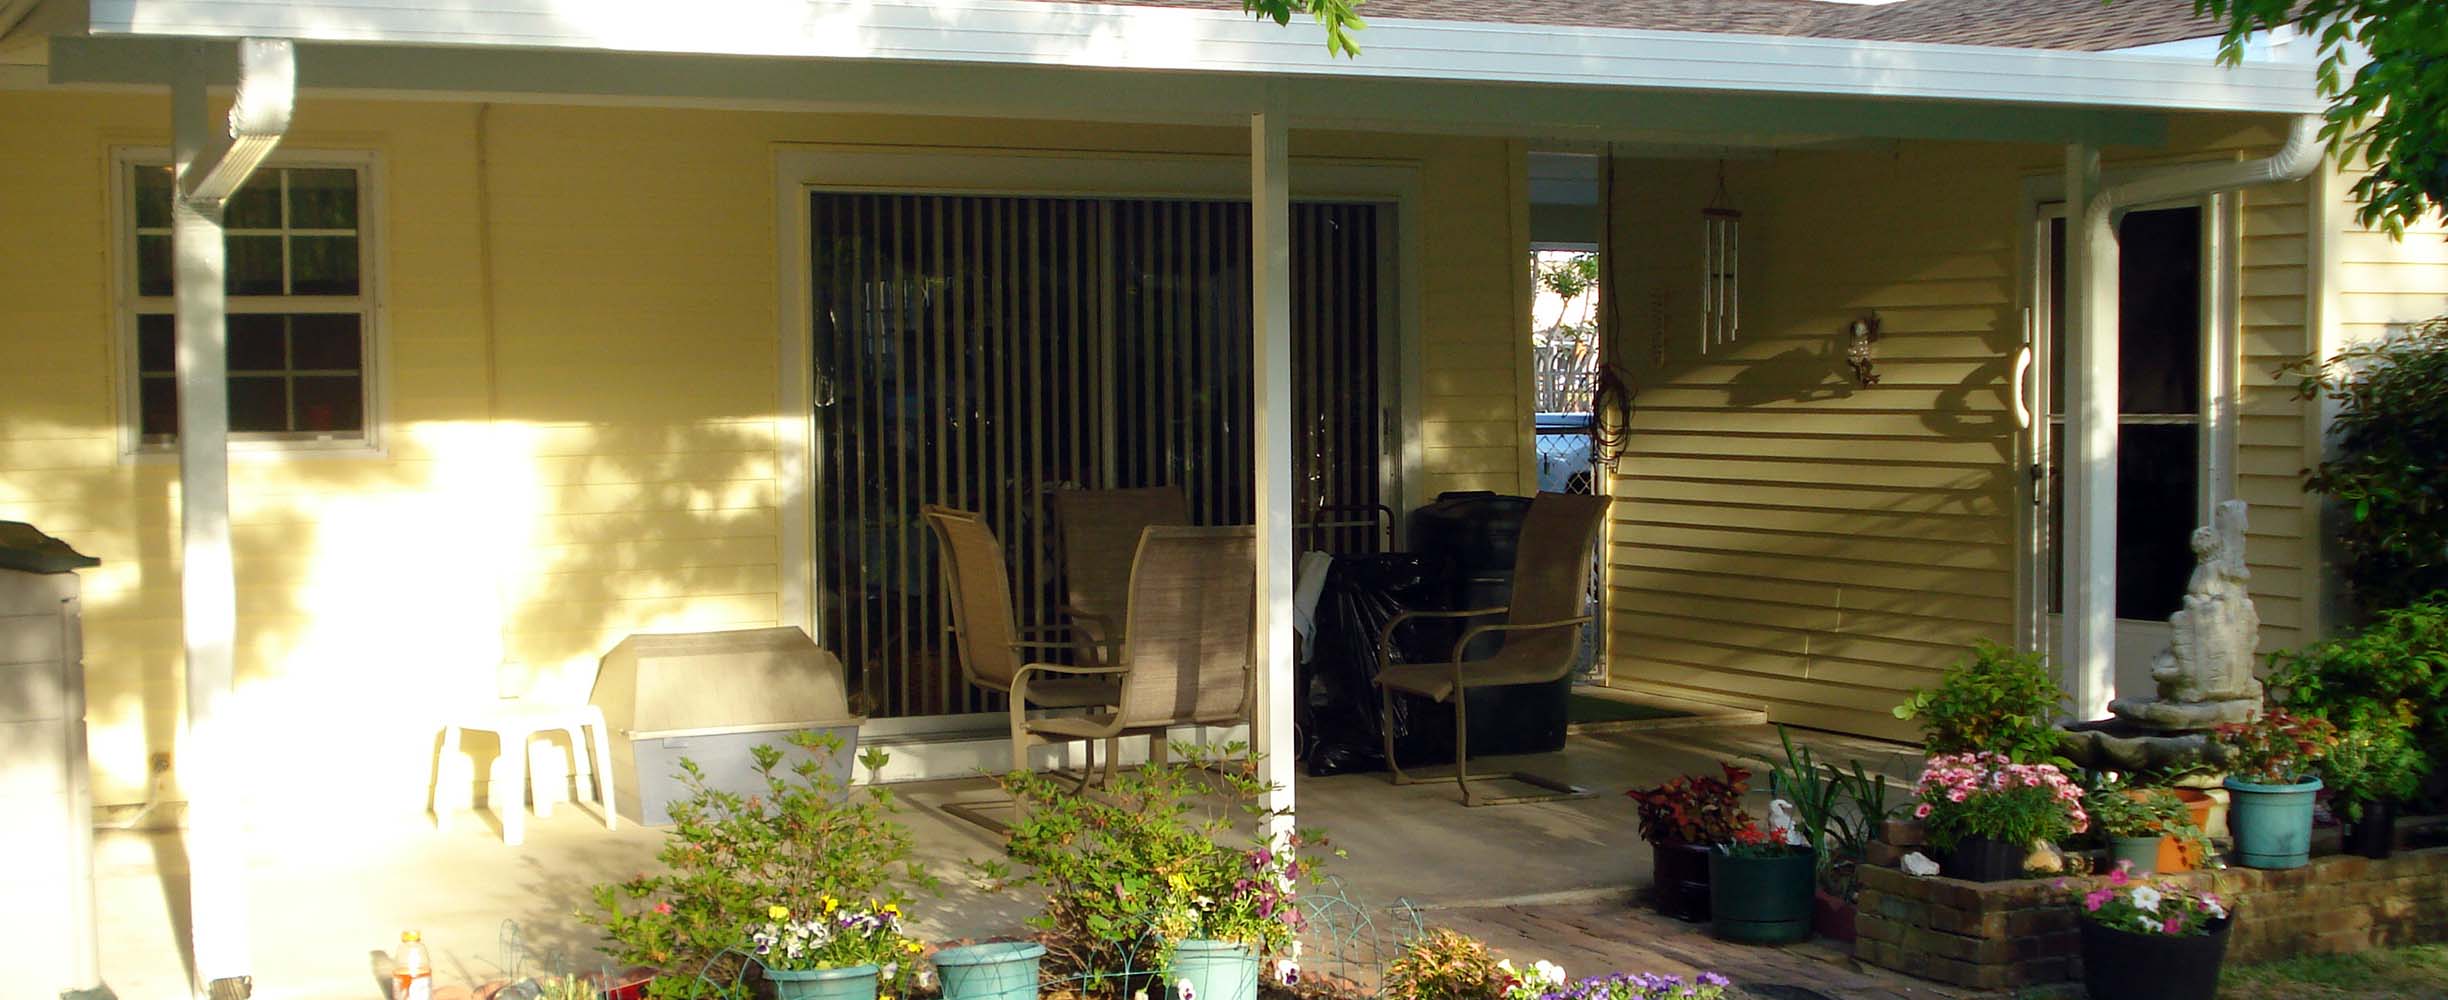 Patio cover are practical solutions that makes a patio space more practical in a very cost-effective manner.